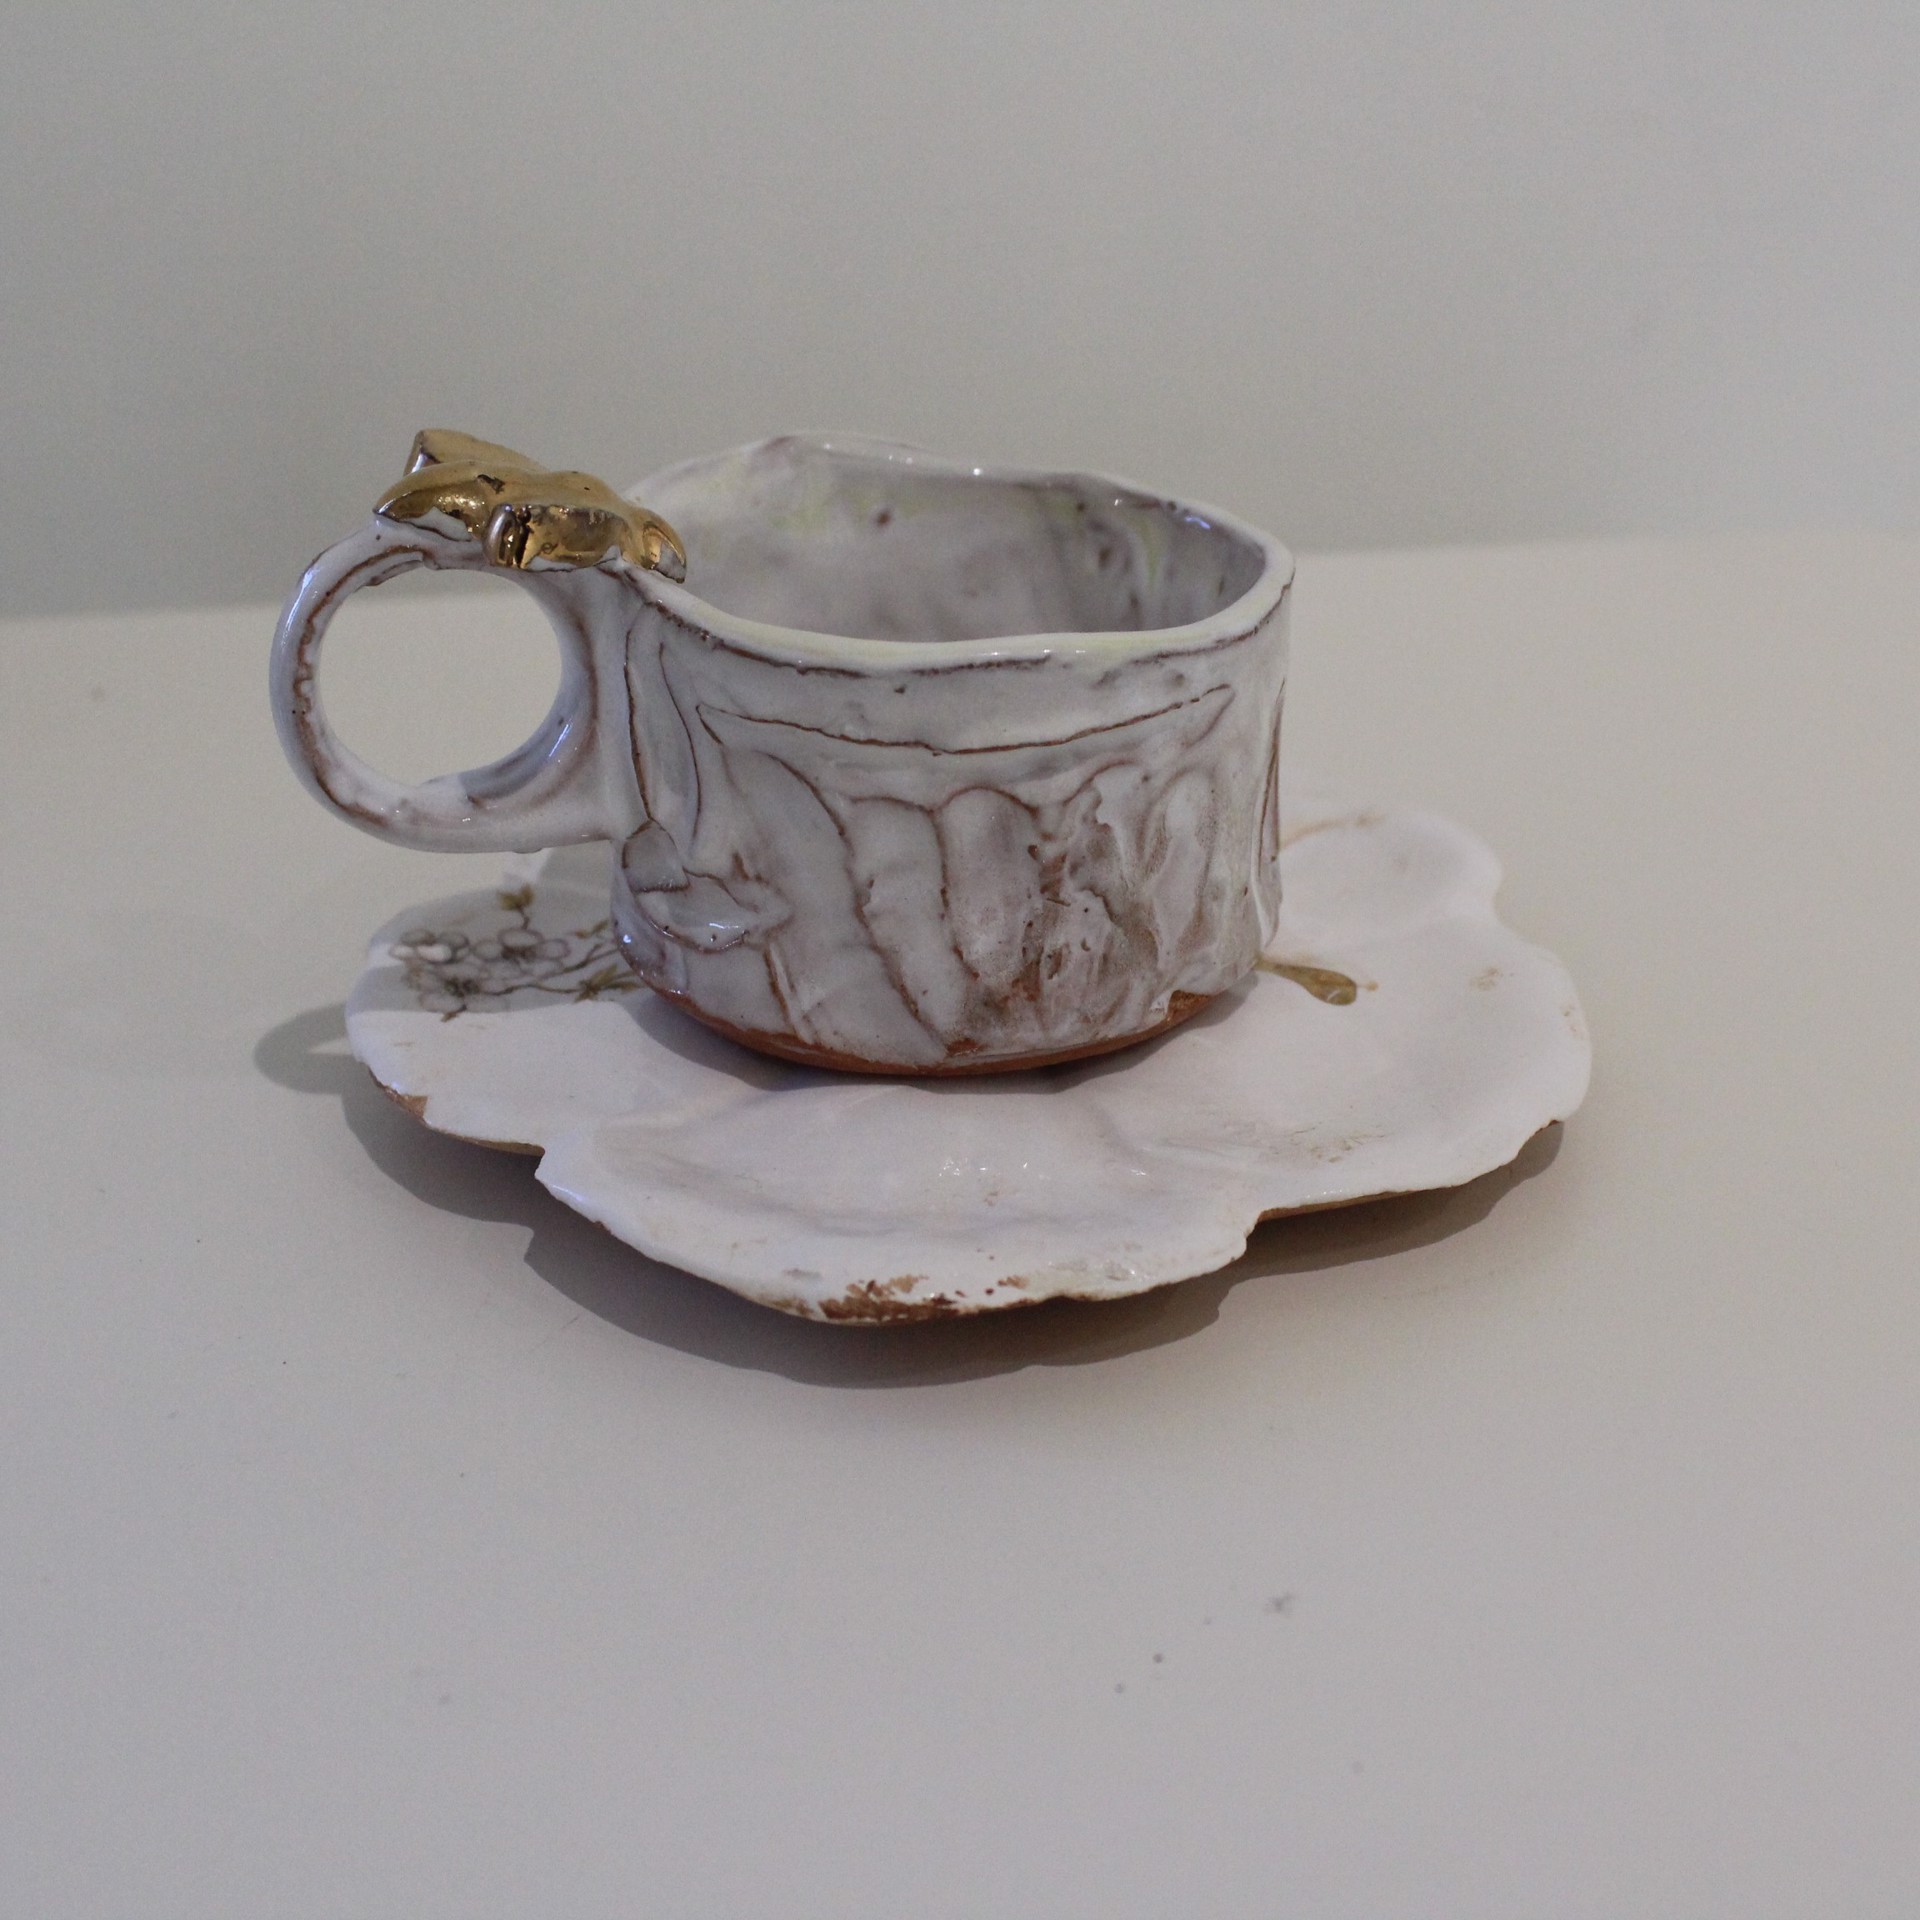 Espresso Cup and Saucer 2 (inspire) by Therese Knowles